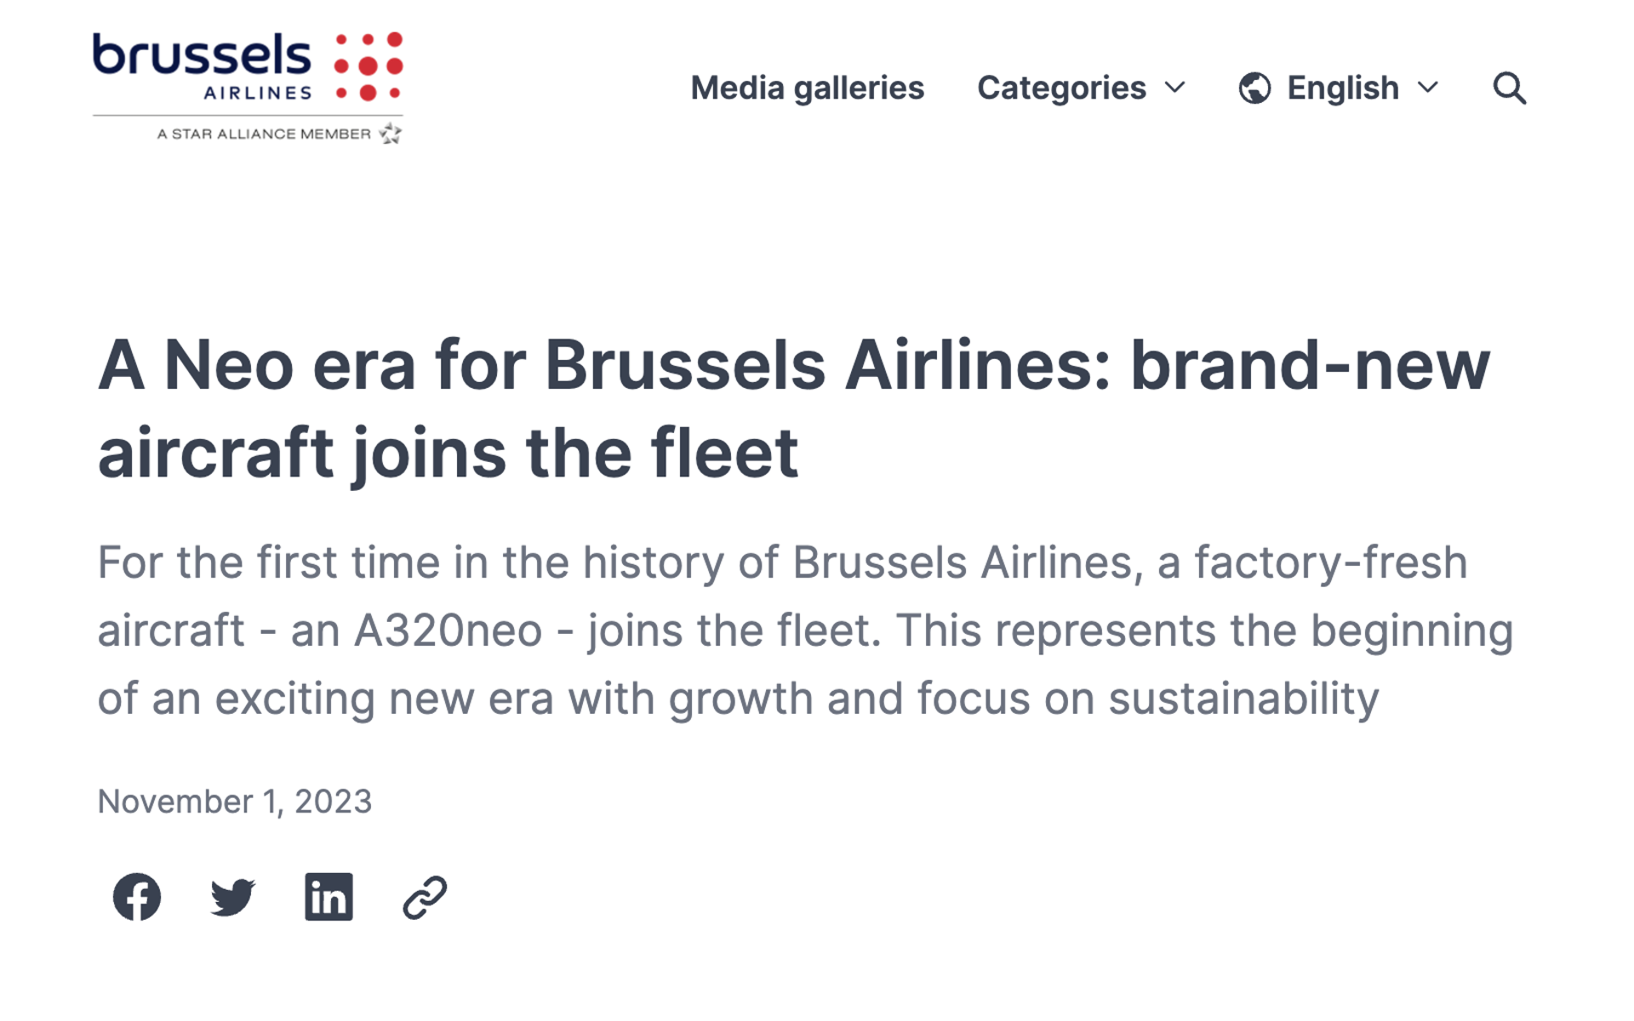 Brand-new aircraft joins the Brussels Airlines fleet